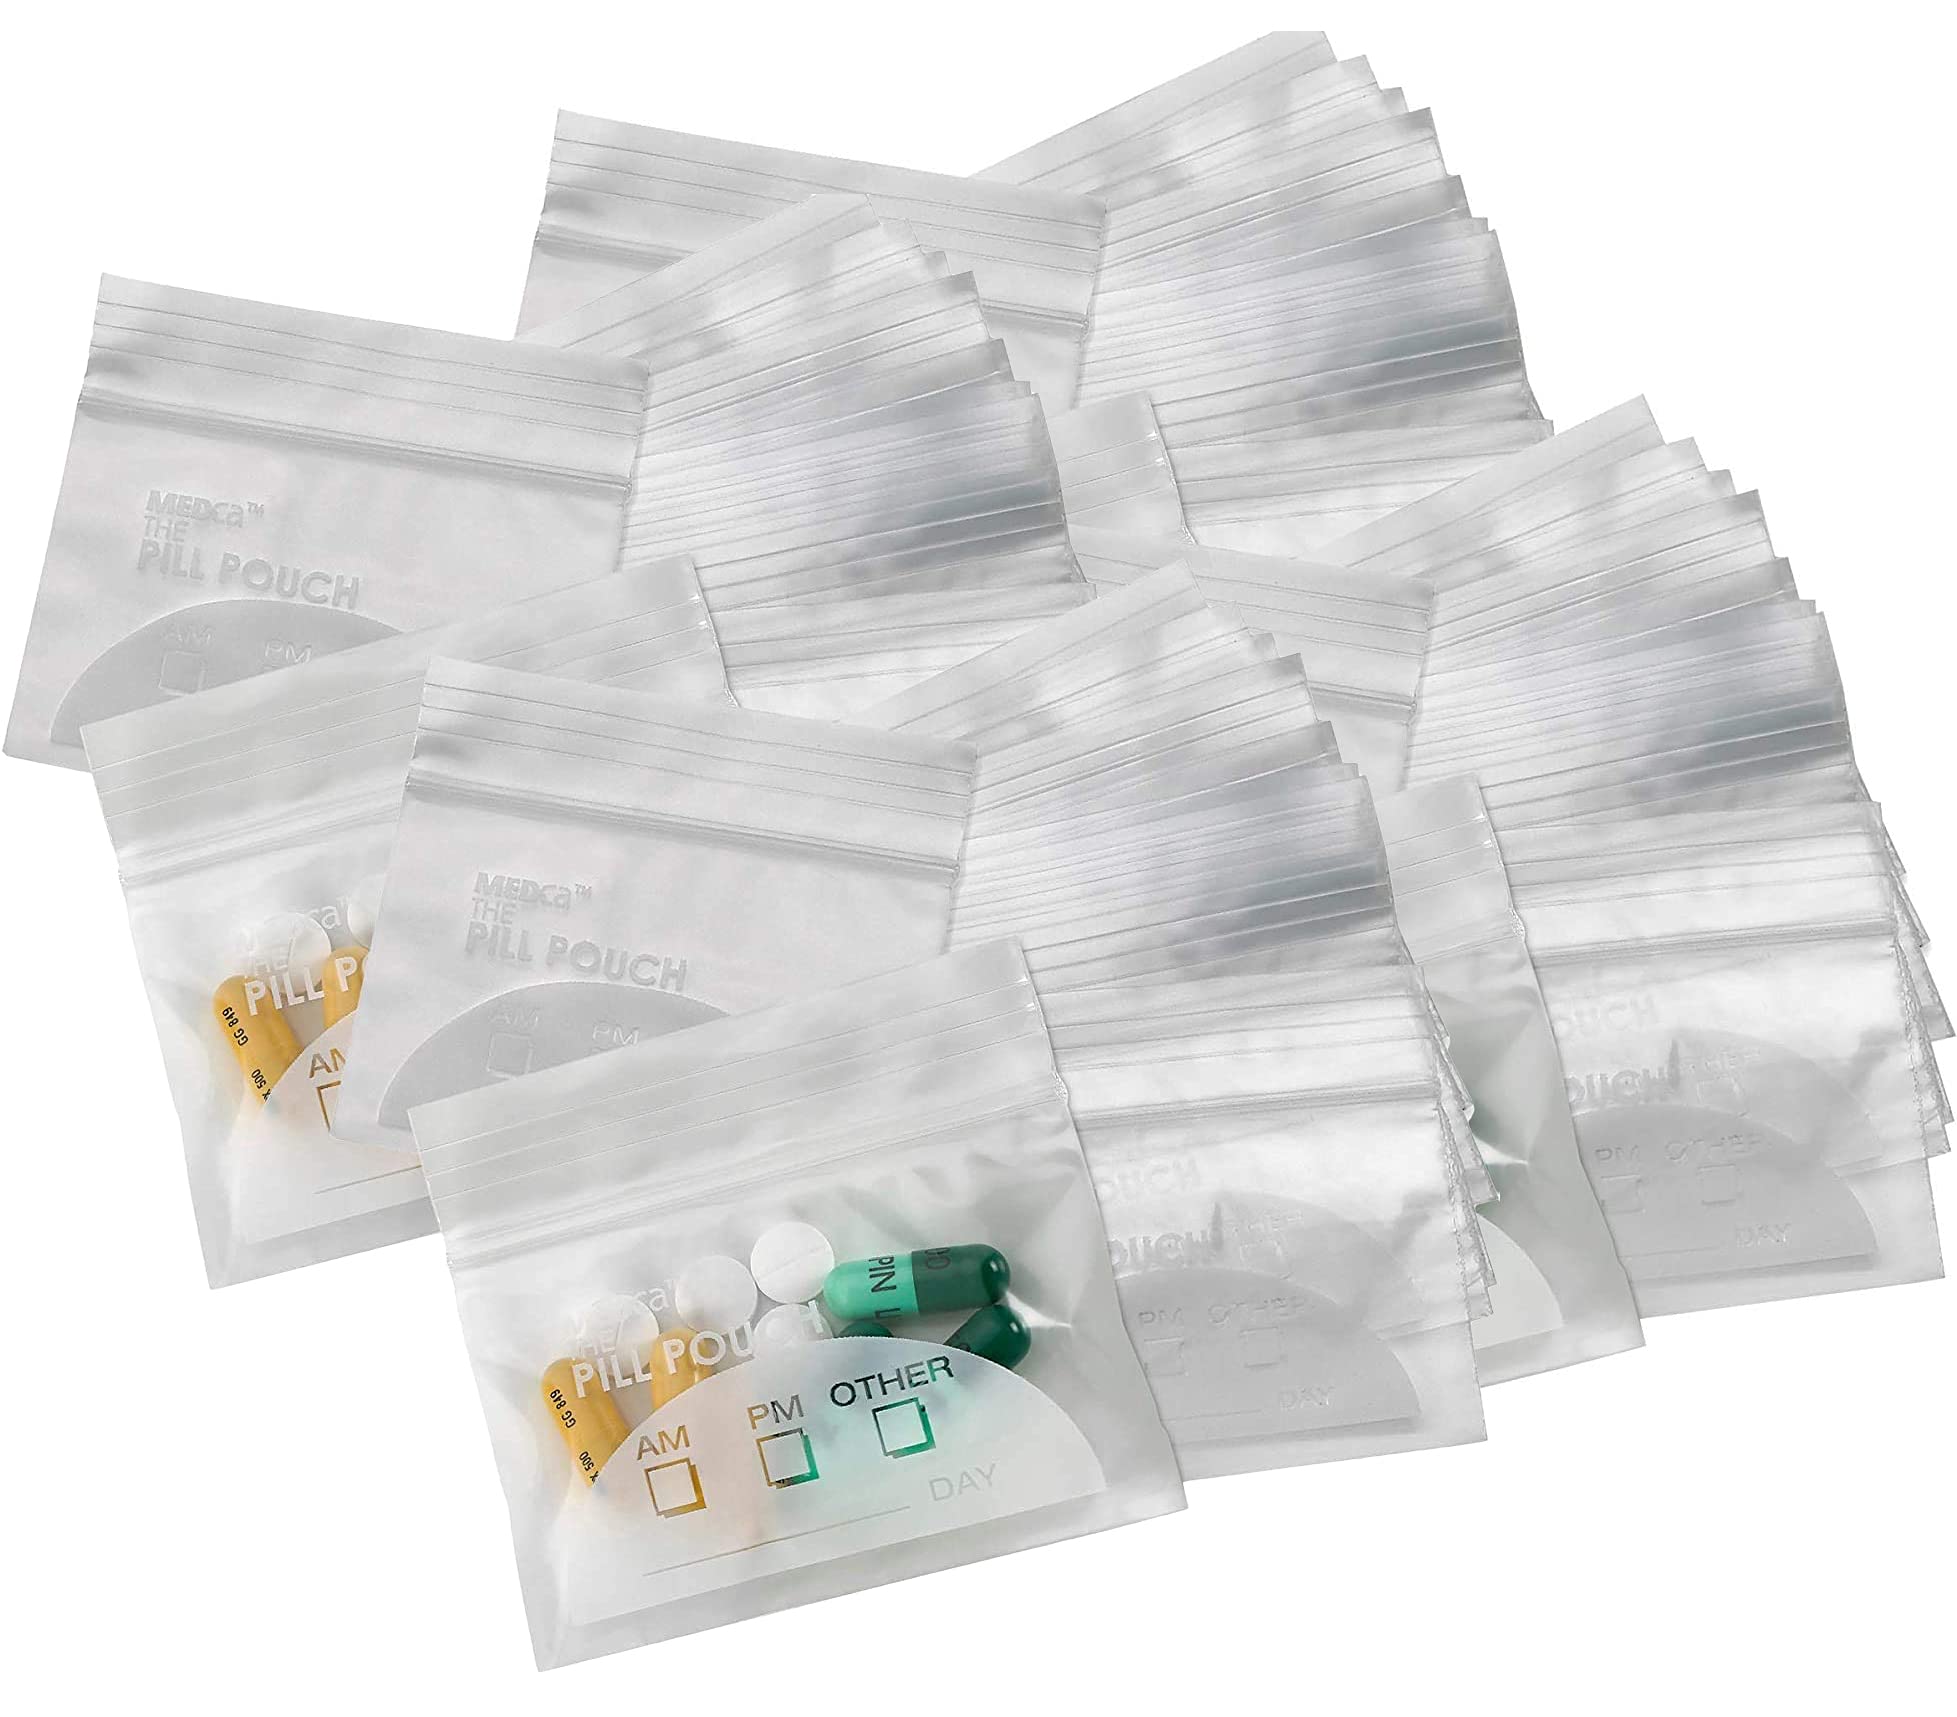 Plastic Pill Travel Organizer Bags With Write-On Labels - 600 Ct